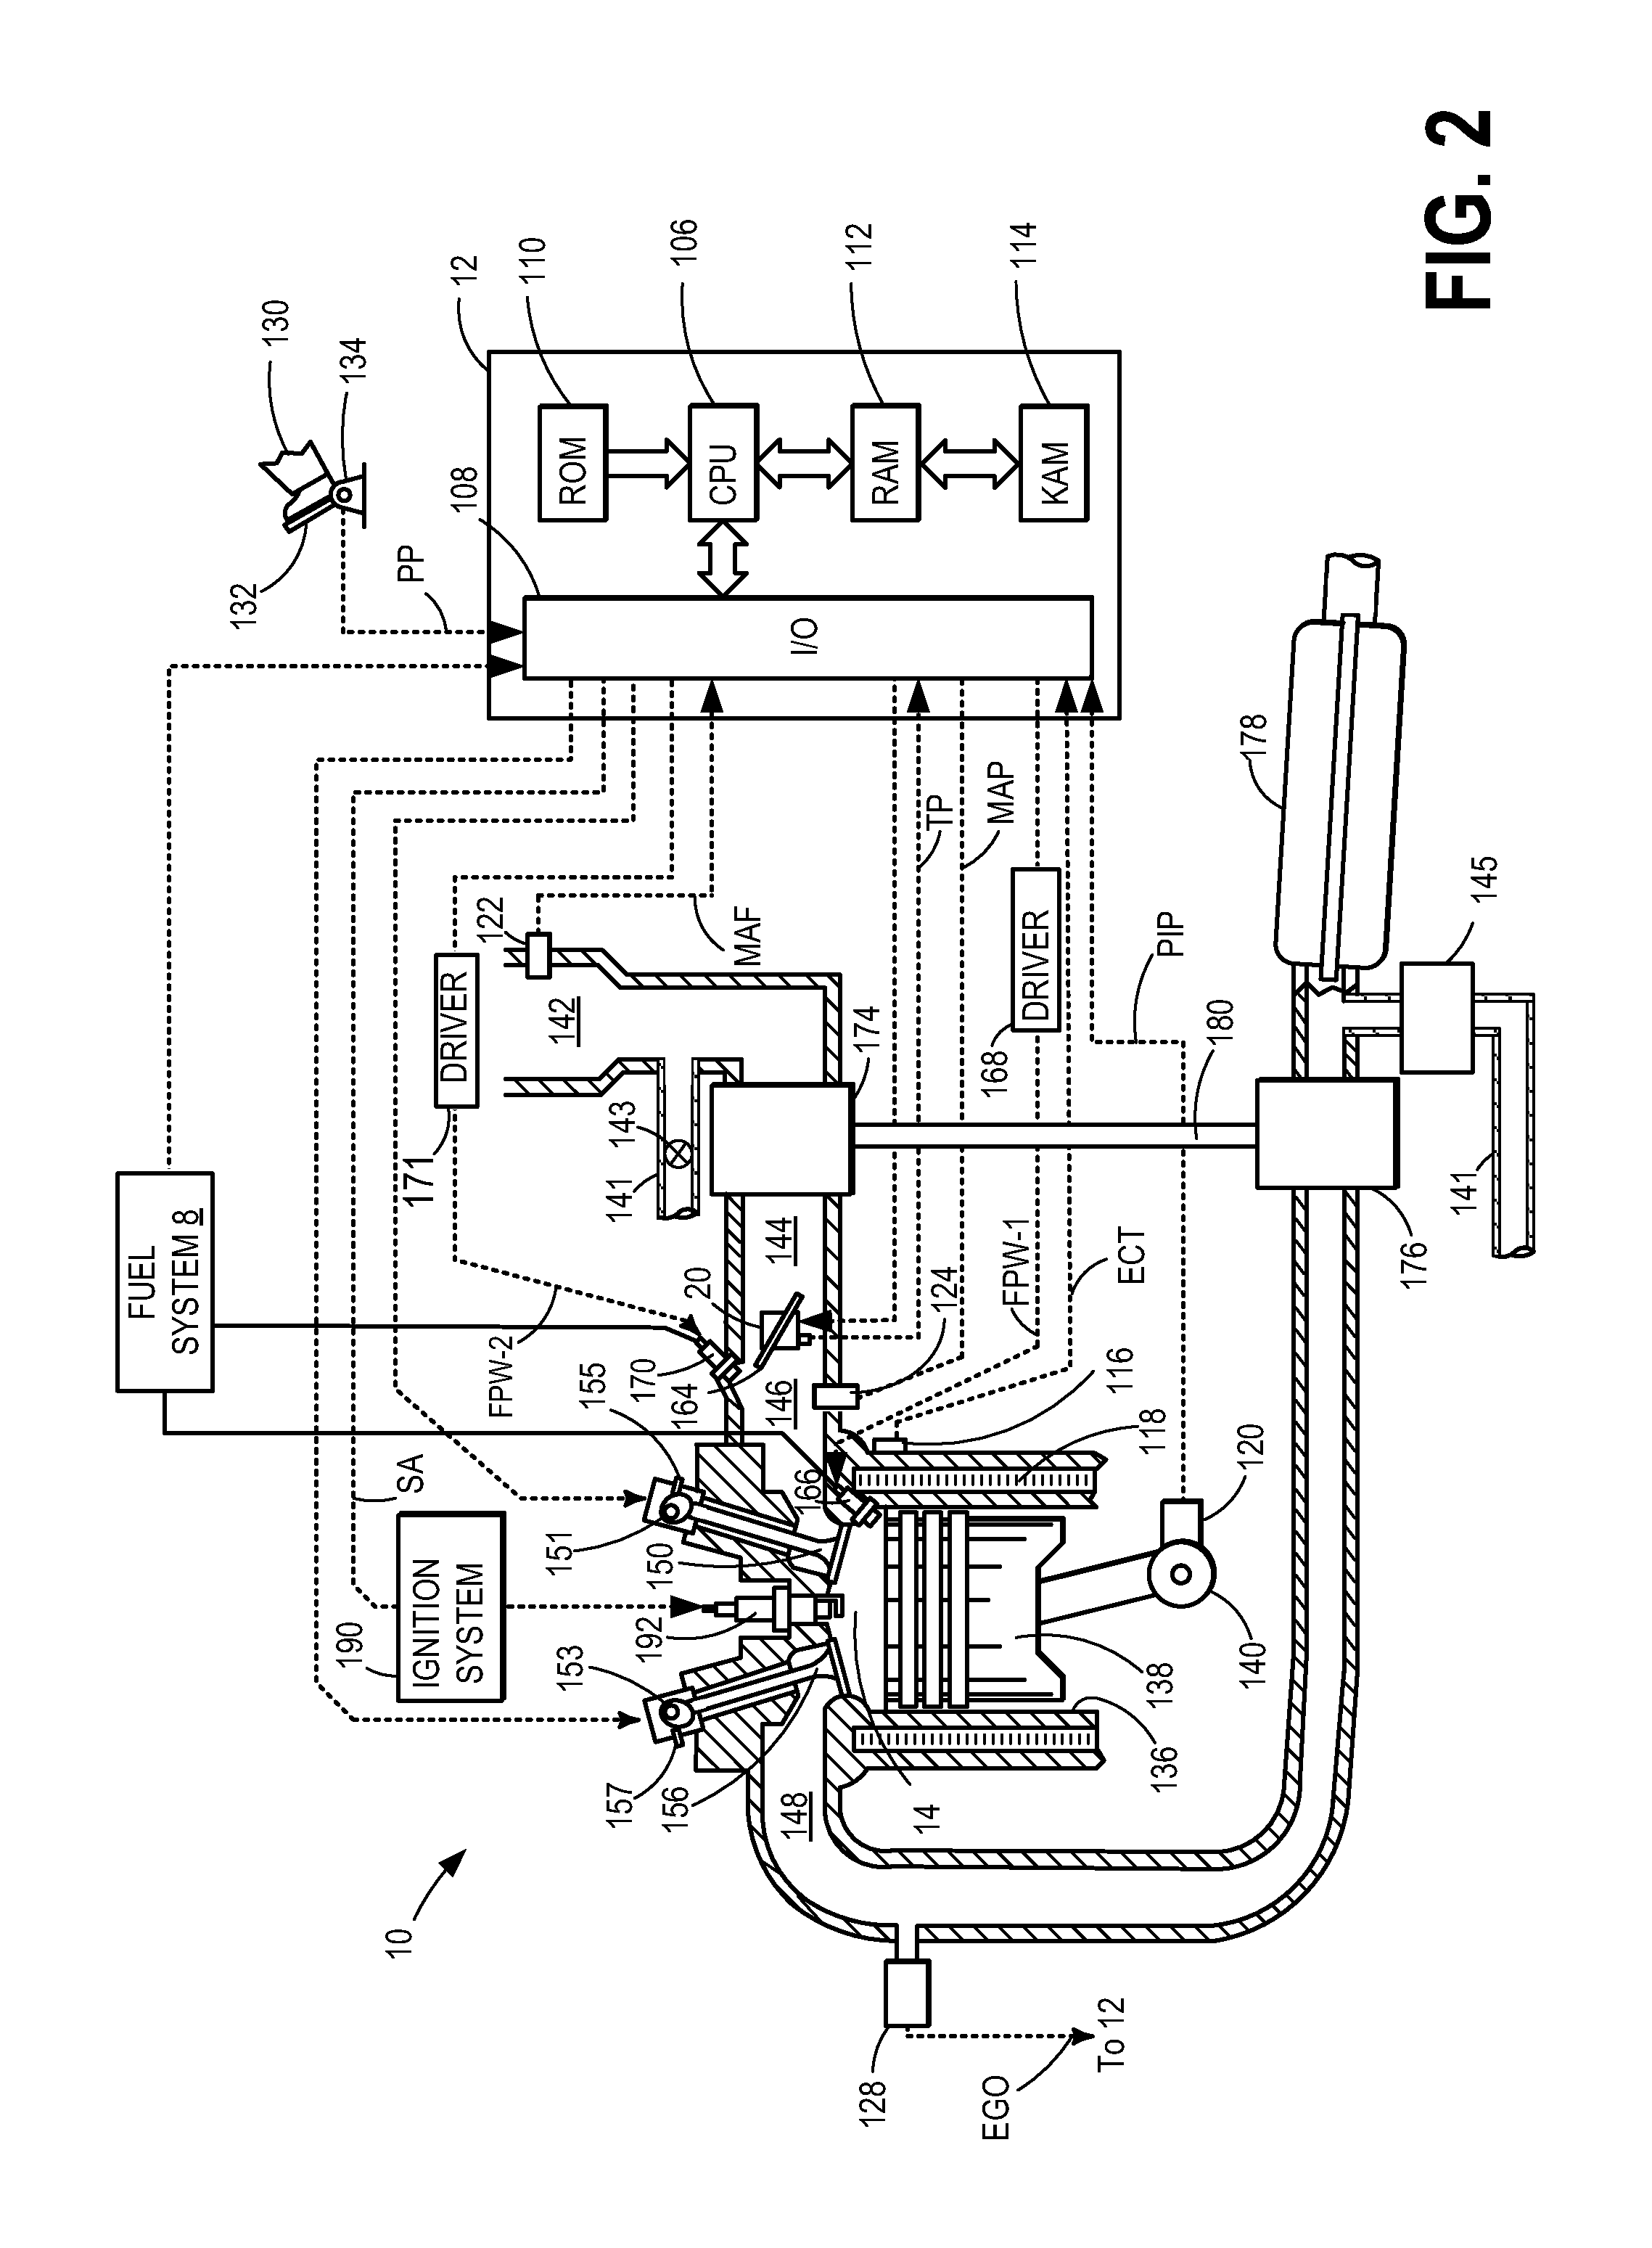 Method and system for engine temperature control